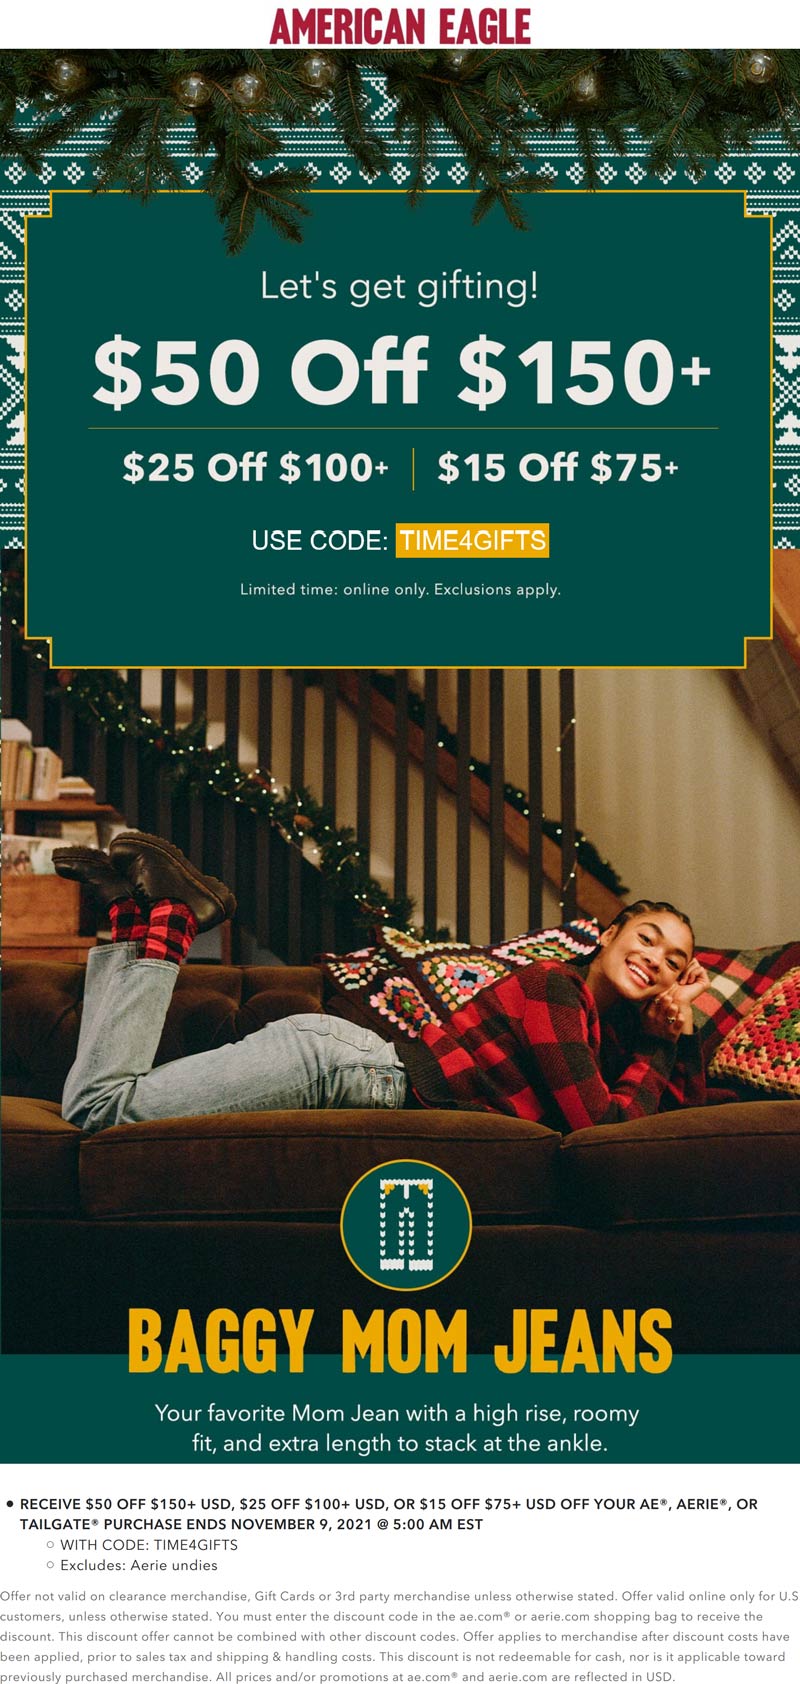 American Eagle stores Coupon  $15-$50 off $75+ online at American Eagle via promo code TIME4GIFTS #americaneagle 